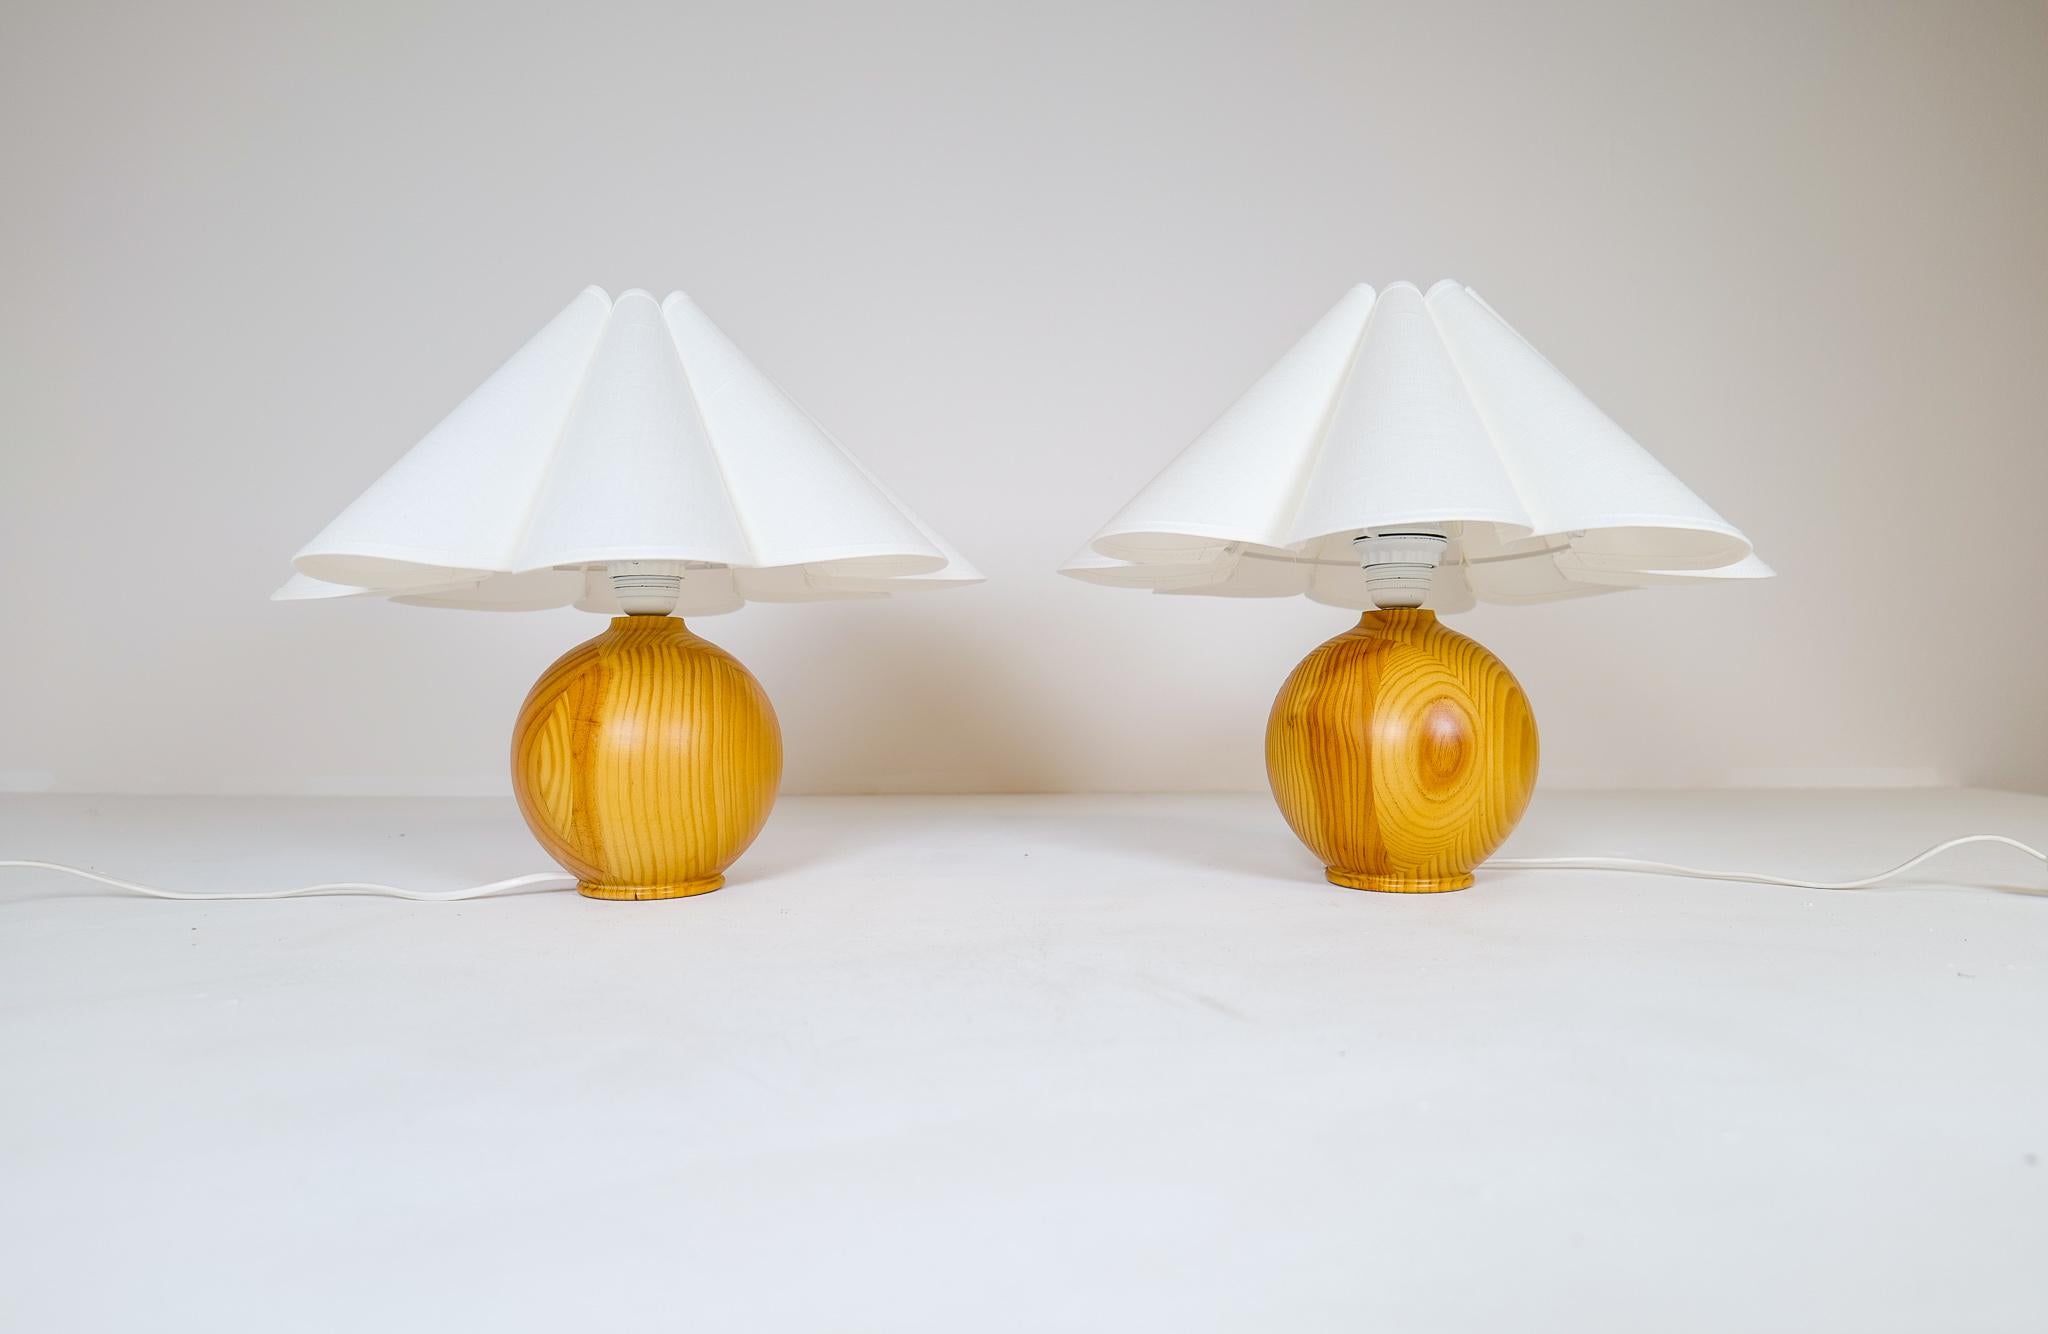 Wonderful, sculptured table lamps made with rounded solid grained pine. The globe grained pine working well with the all-new high-quality shades produced in Sweden.

Good working vintage condition, with wear consistent with age and use. New shade